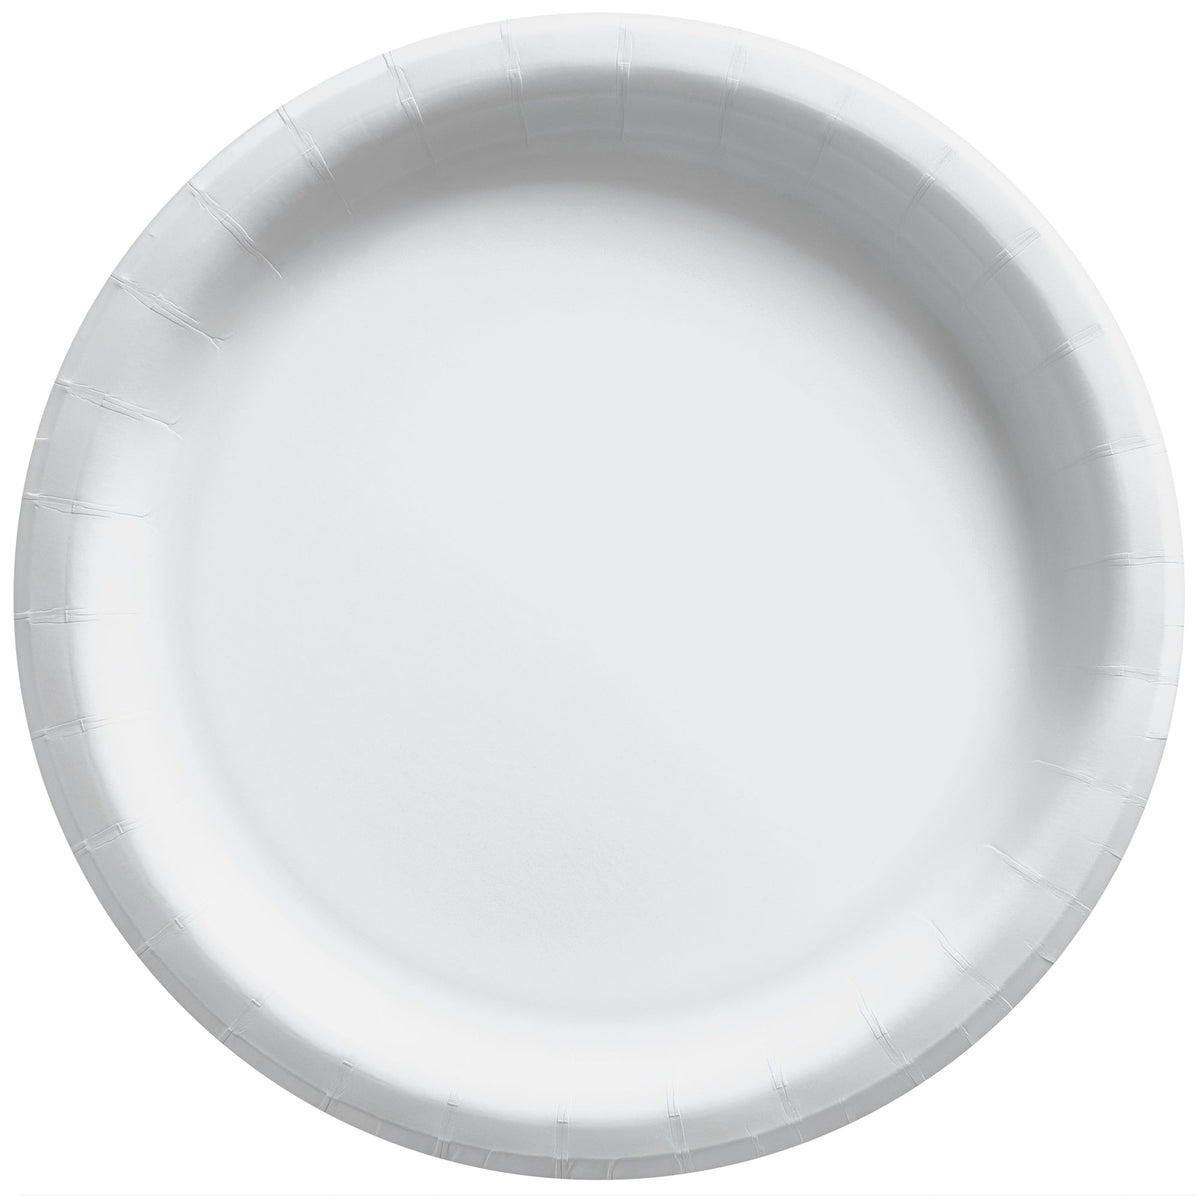 Frosty White 6 3/4" Round Paper Plates, 20 count